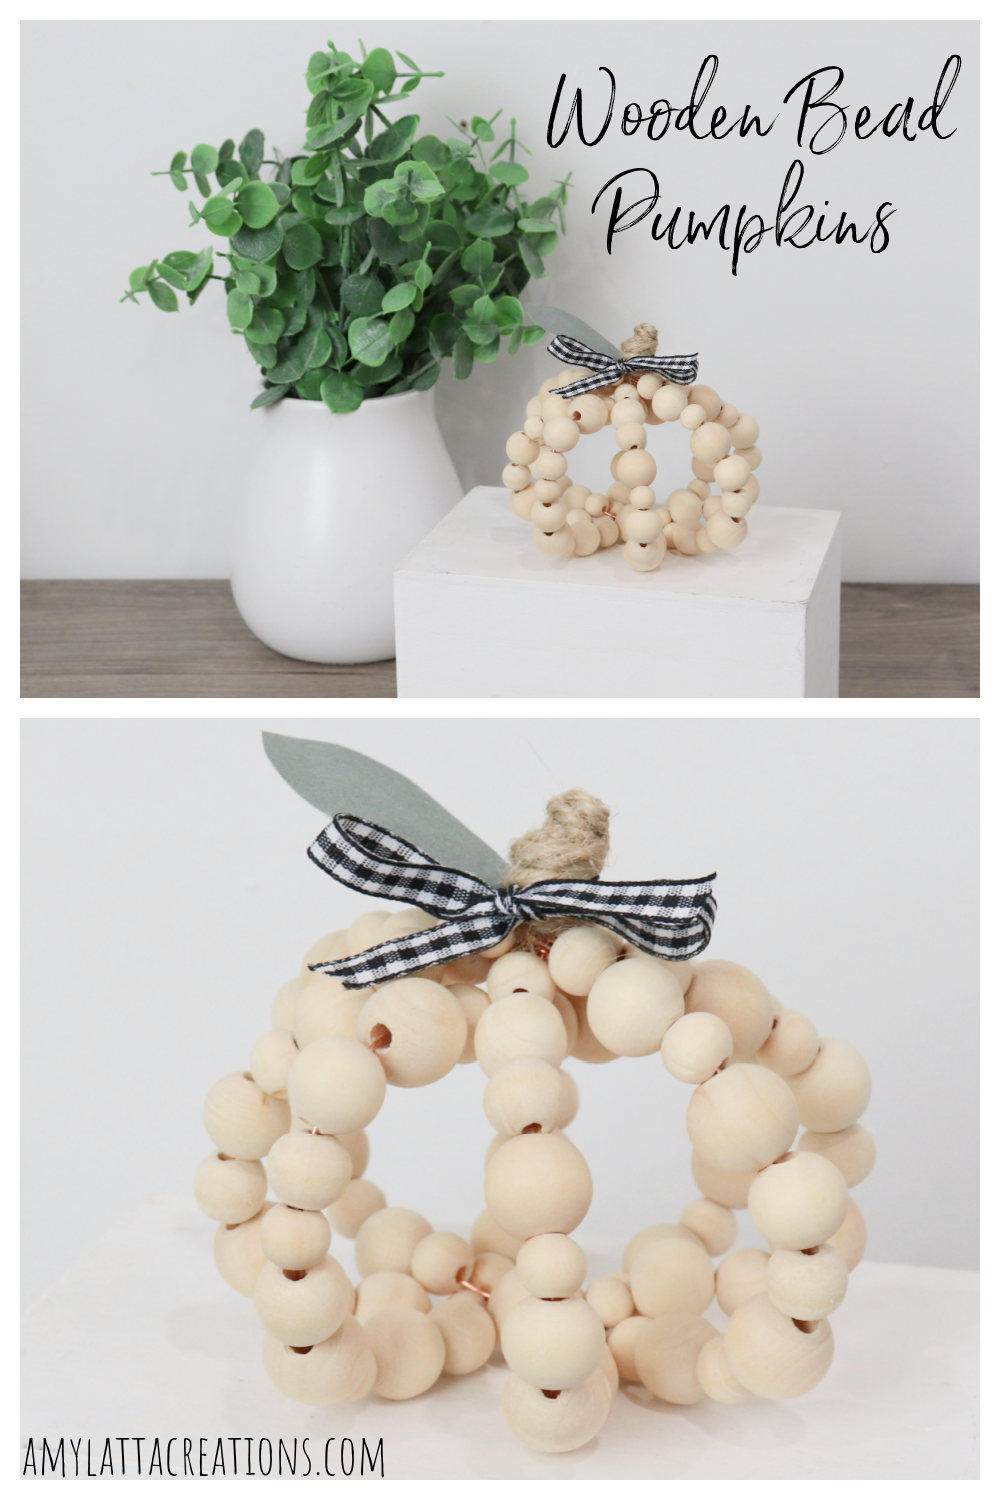 Image is a collage of wooden bead pumpkins for Pinterest.